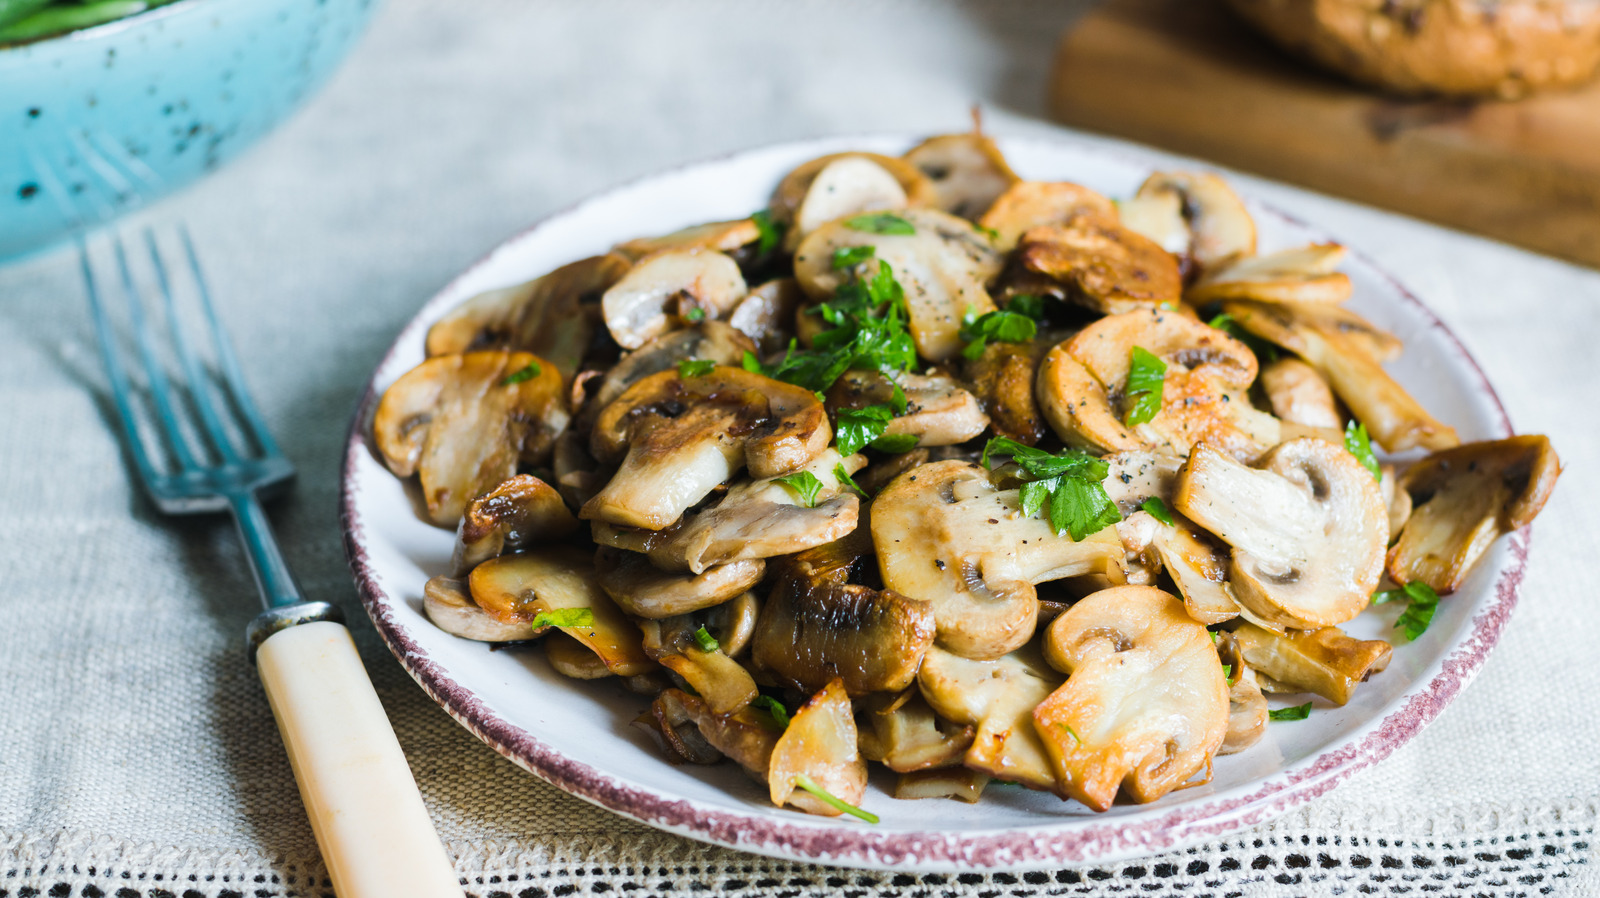 Why You Should Skip The Oil When Air Frying Mushrooms